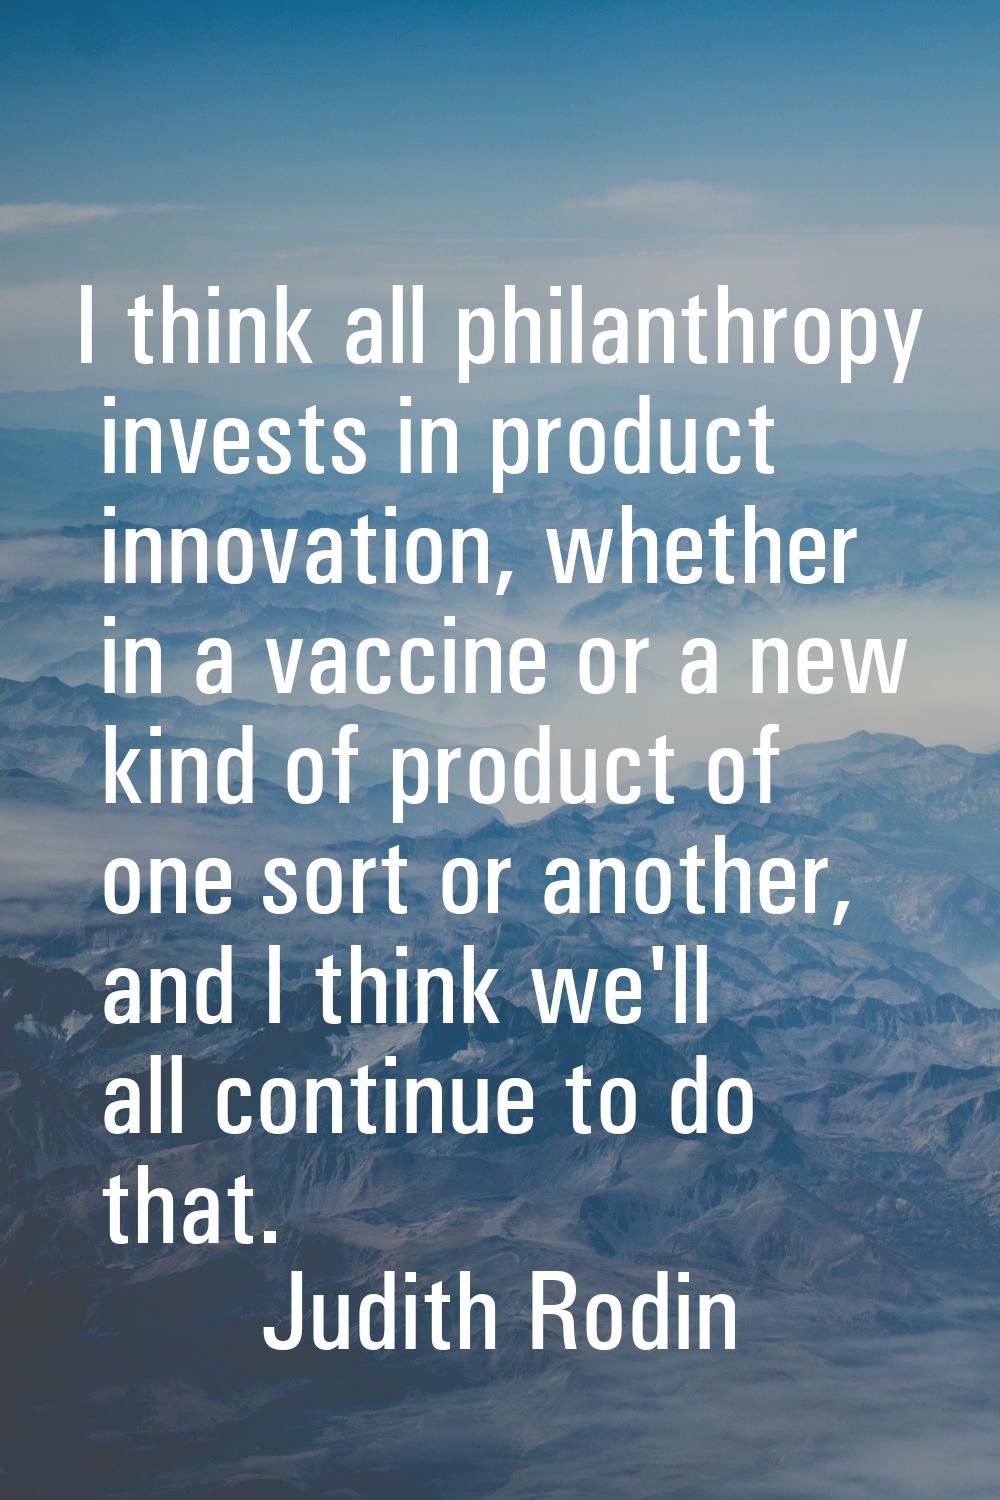 I think all philanthropy invests in product innovation, whether in a vaccine or a new kind of produ